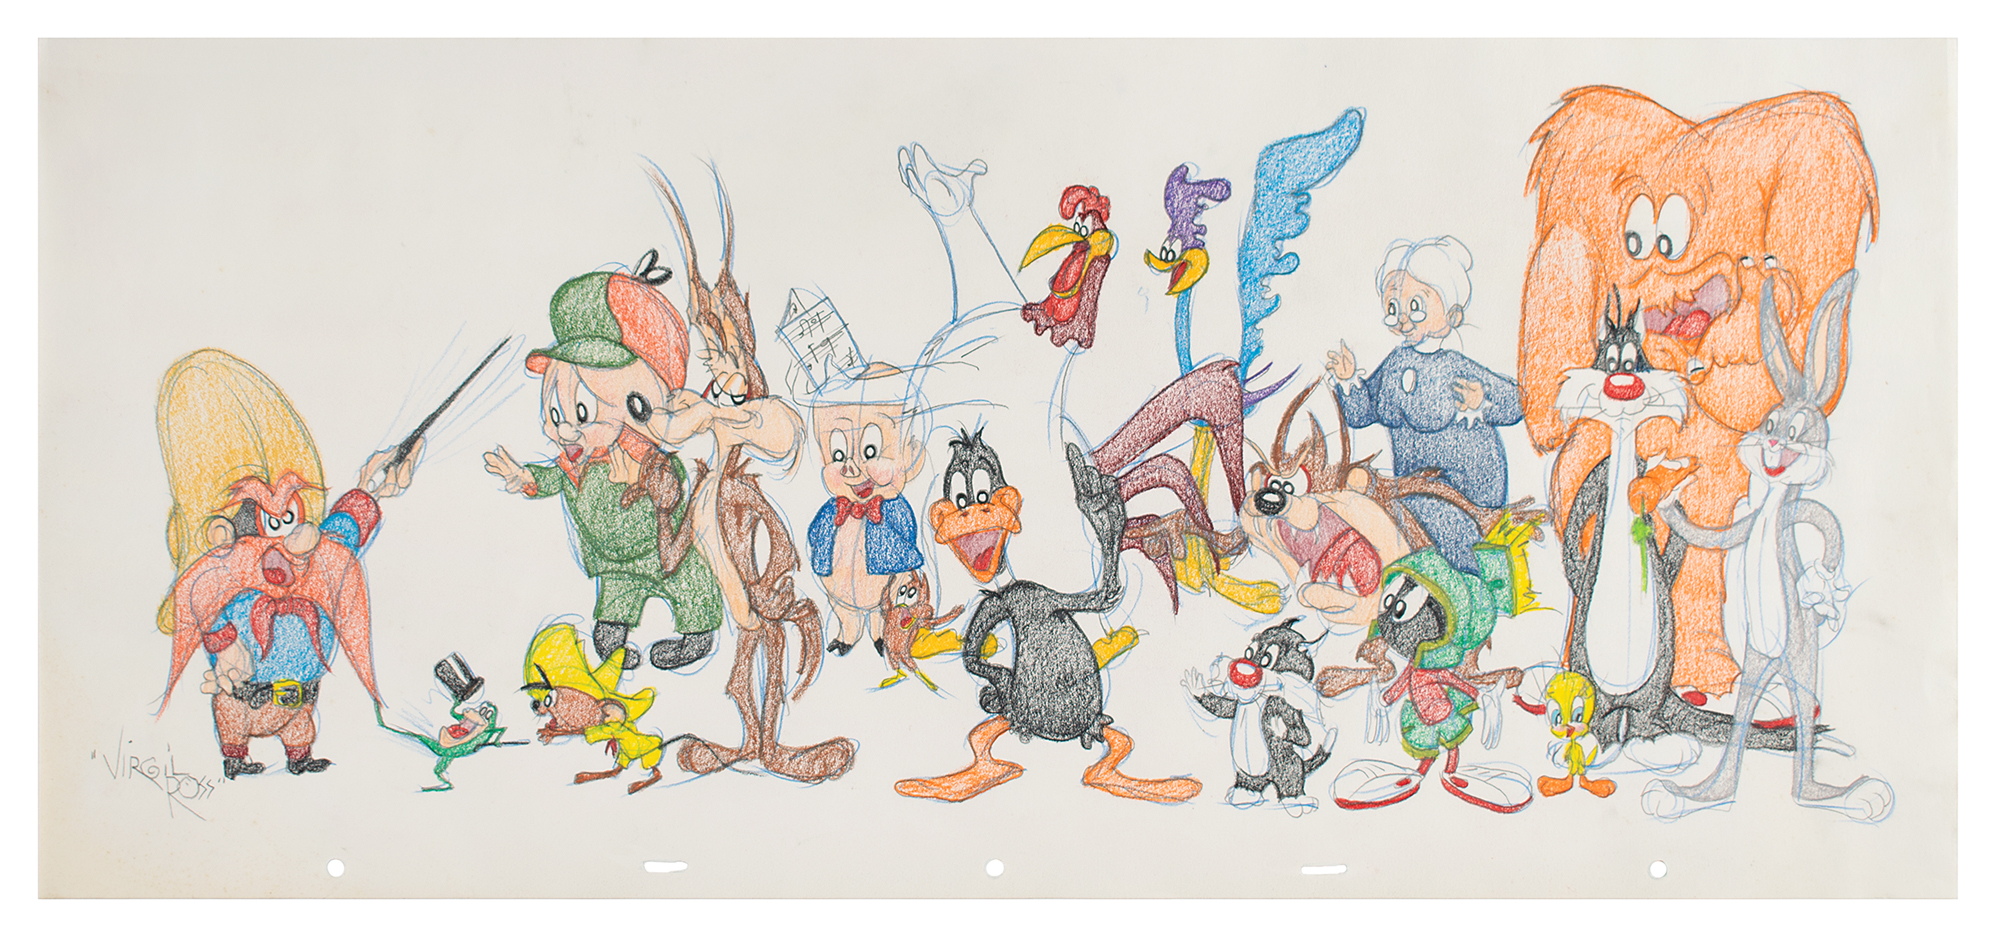 Looney Tunes original panorama drawing by Virgil Ross | RR Auction